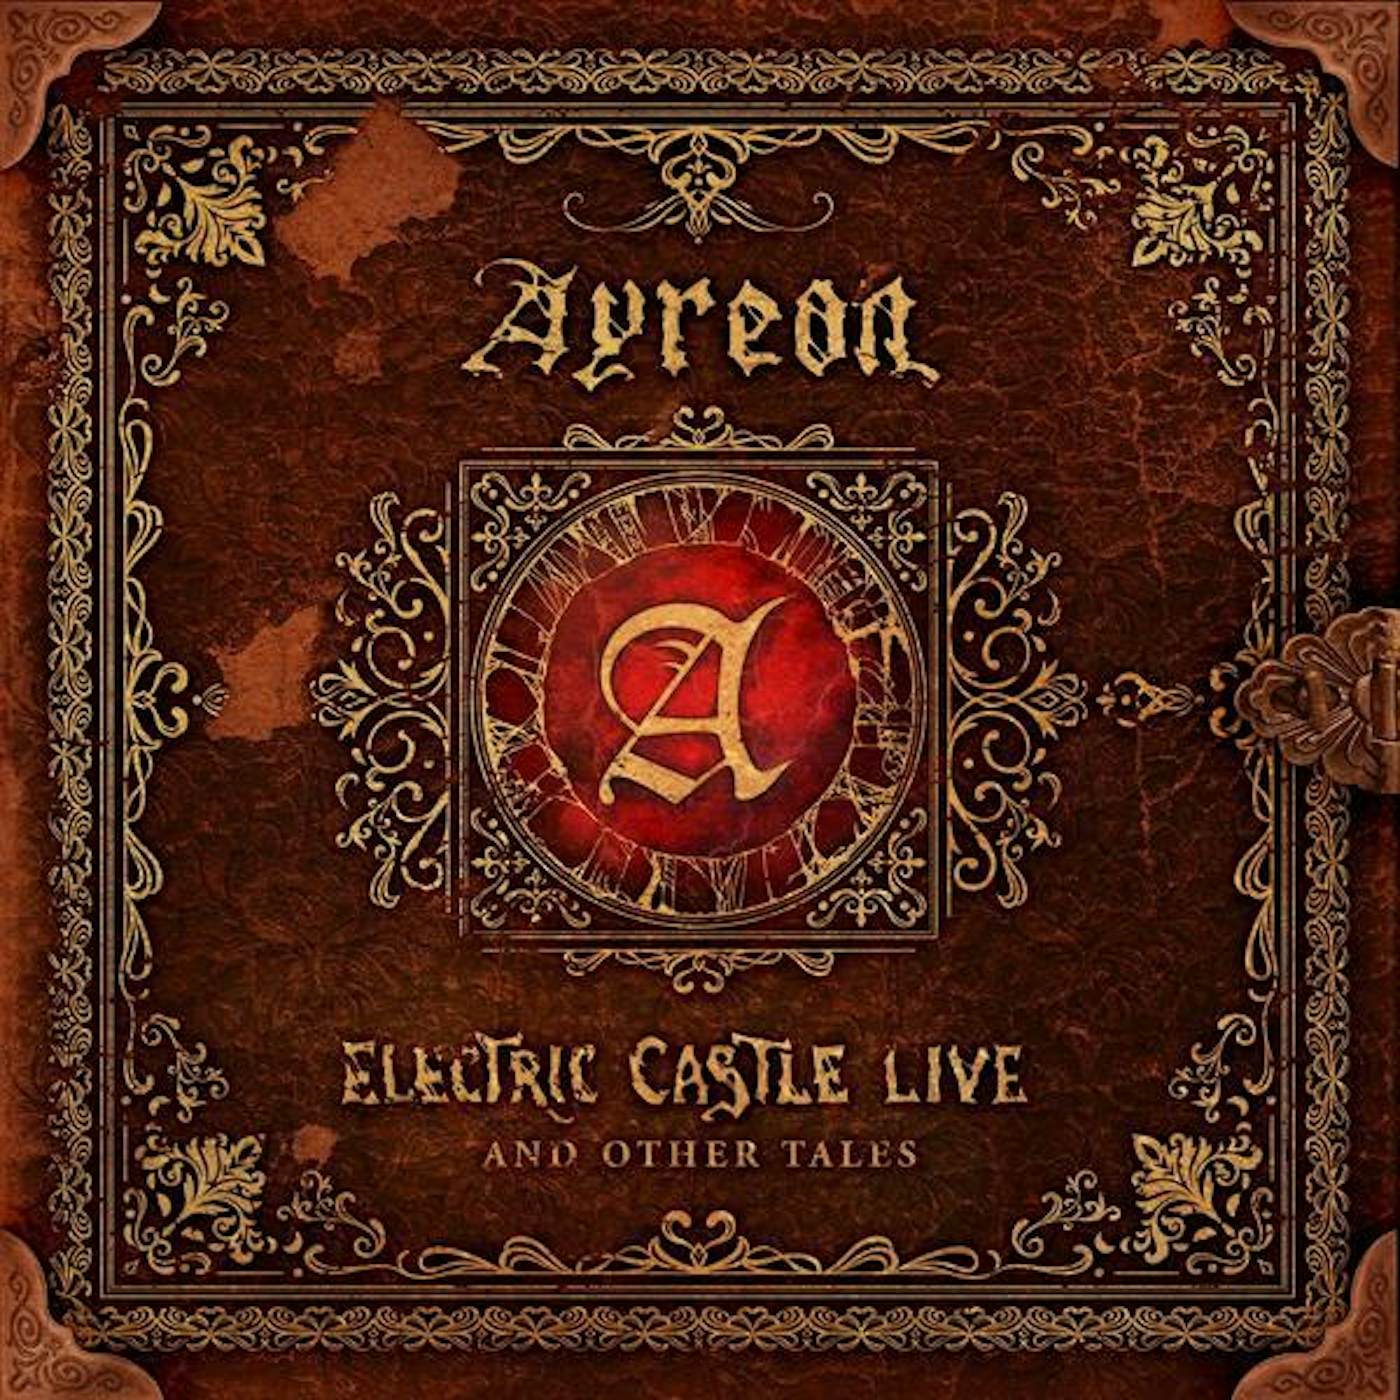 Ayreon Electric Castle Live And Other Tales Vinyl Record